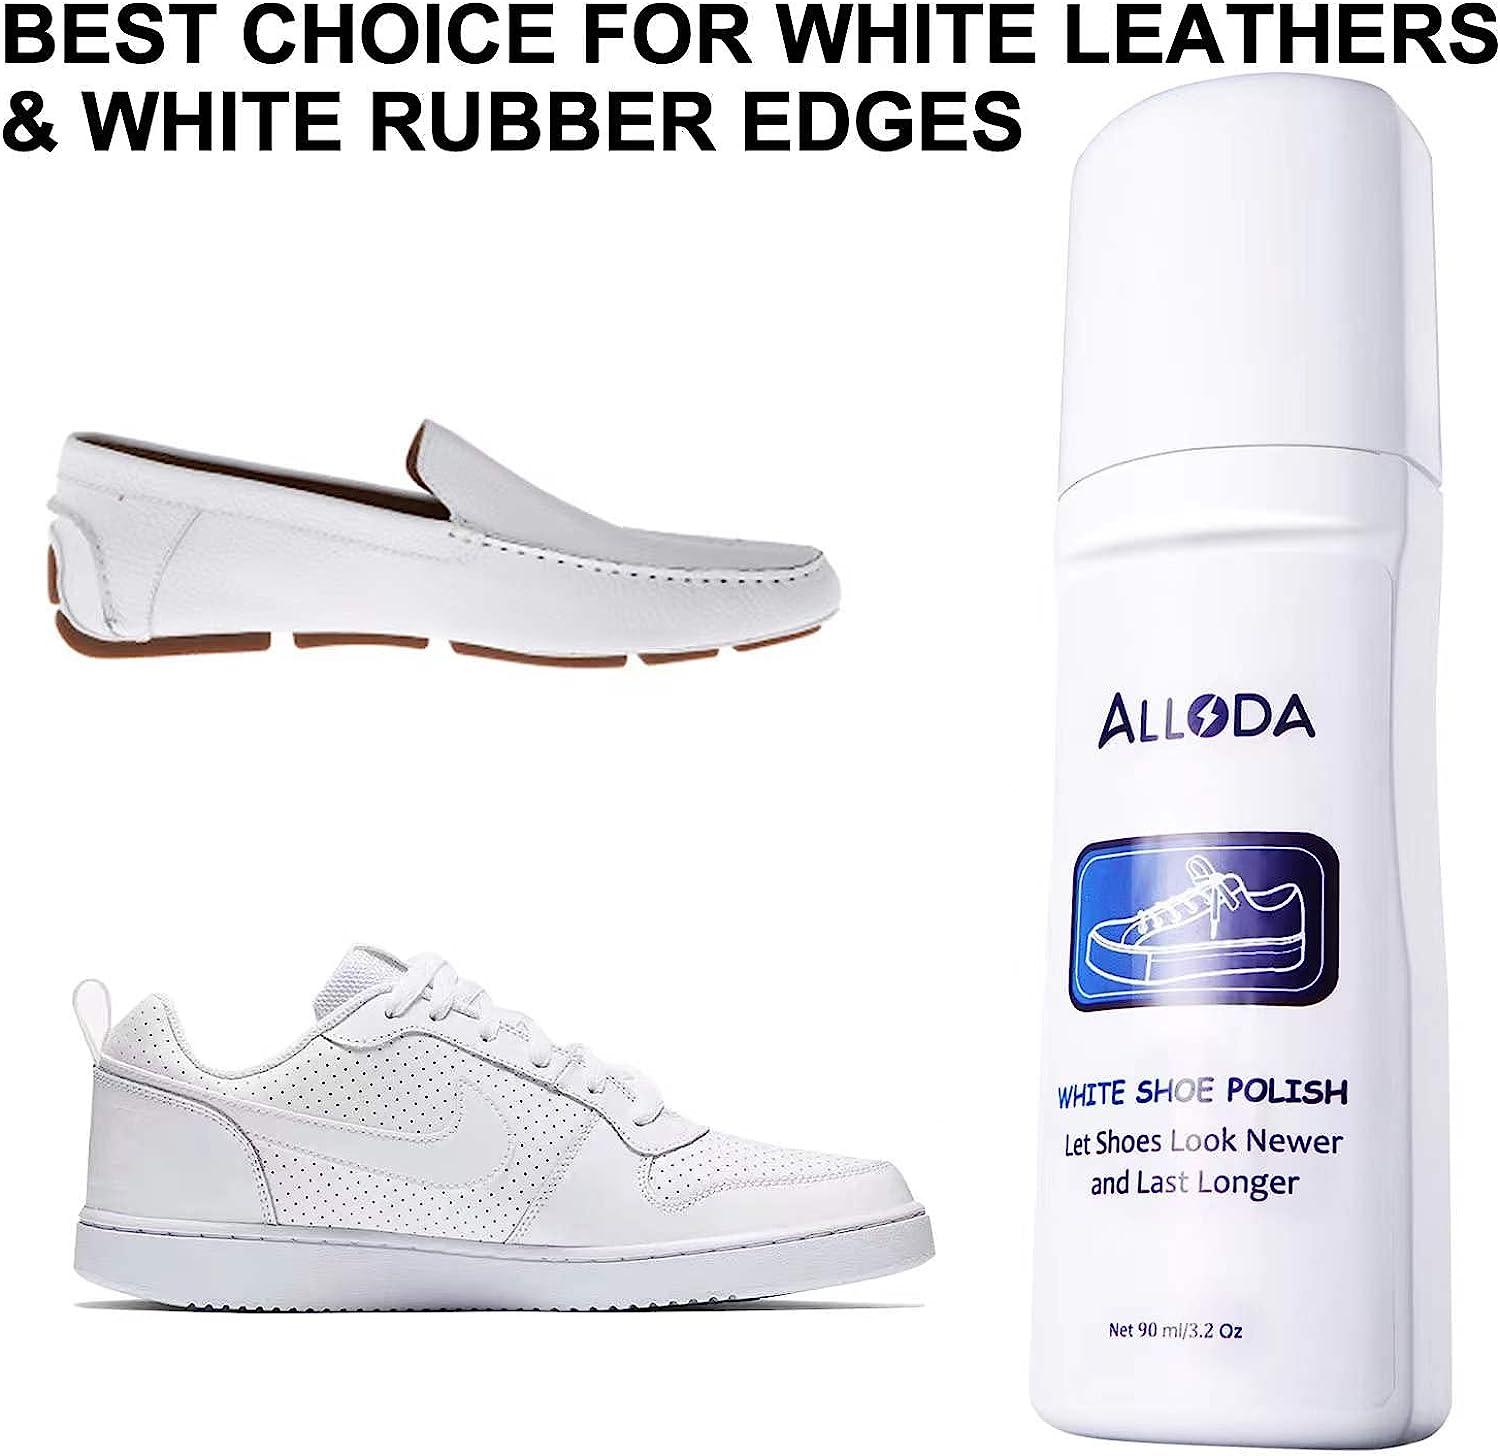 Amazing Shoe Cleaner and Whitener for Leather, Vinyl, Canvas, Nylon and More Scuff Cover to Whiten Leather Sneakers Shoes White Polish Cover to Repair